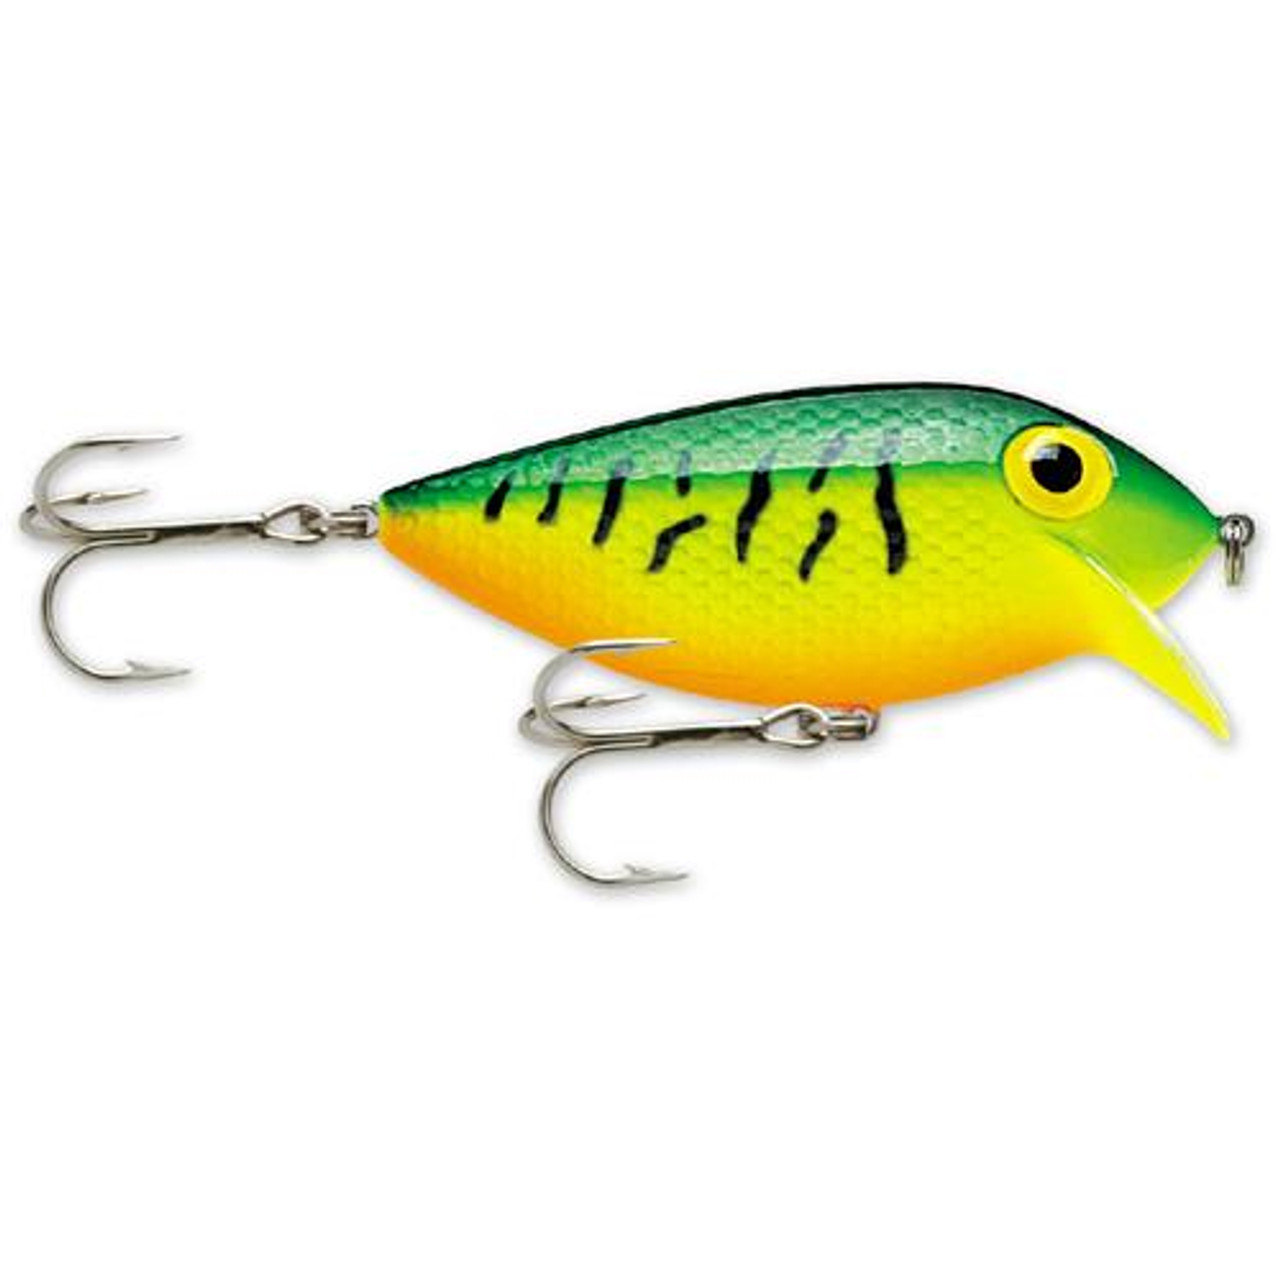 ThinFin 08 Metallic Gold Black, Diving Lures -  Canada